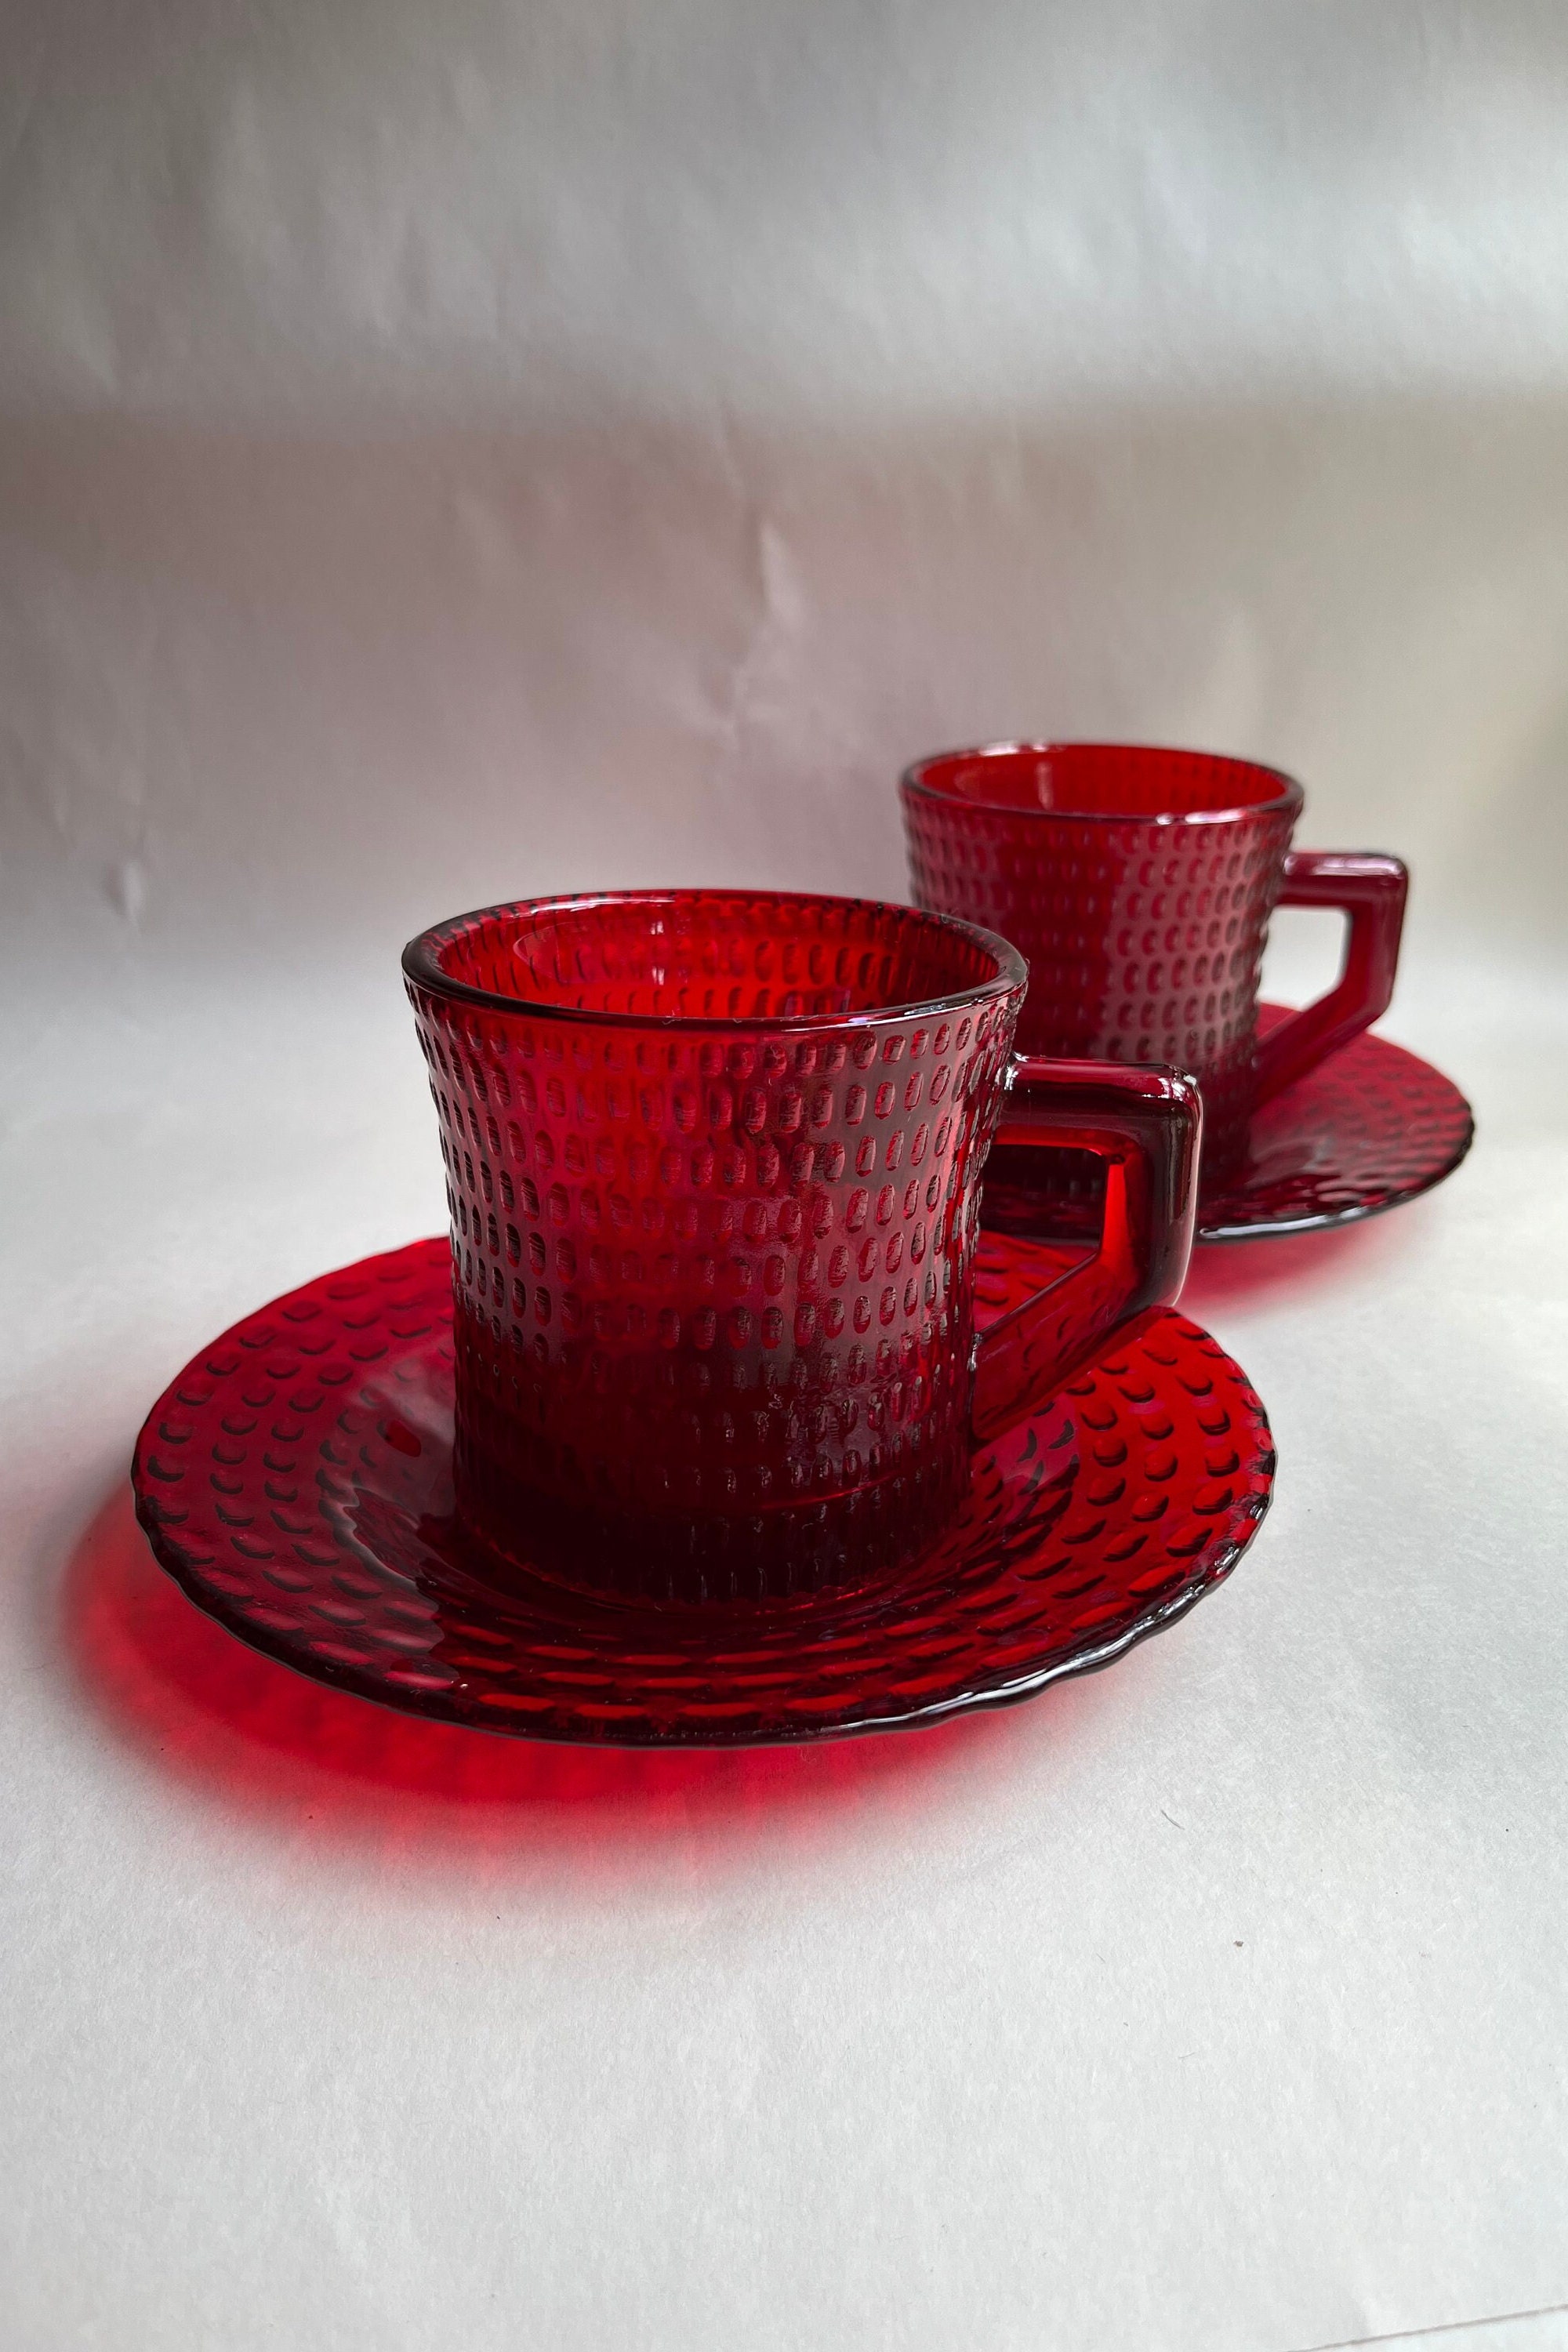 Retro Style Textured Colored Glass Coffee Cup With Matching Saucer Colored  Glass Tea Cup With Saucer Set vintage Style Tea Cup 